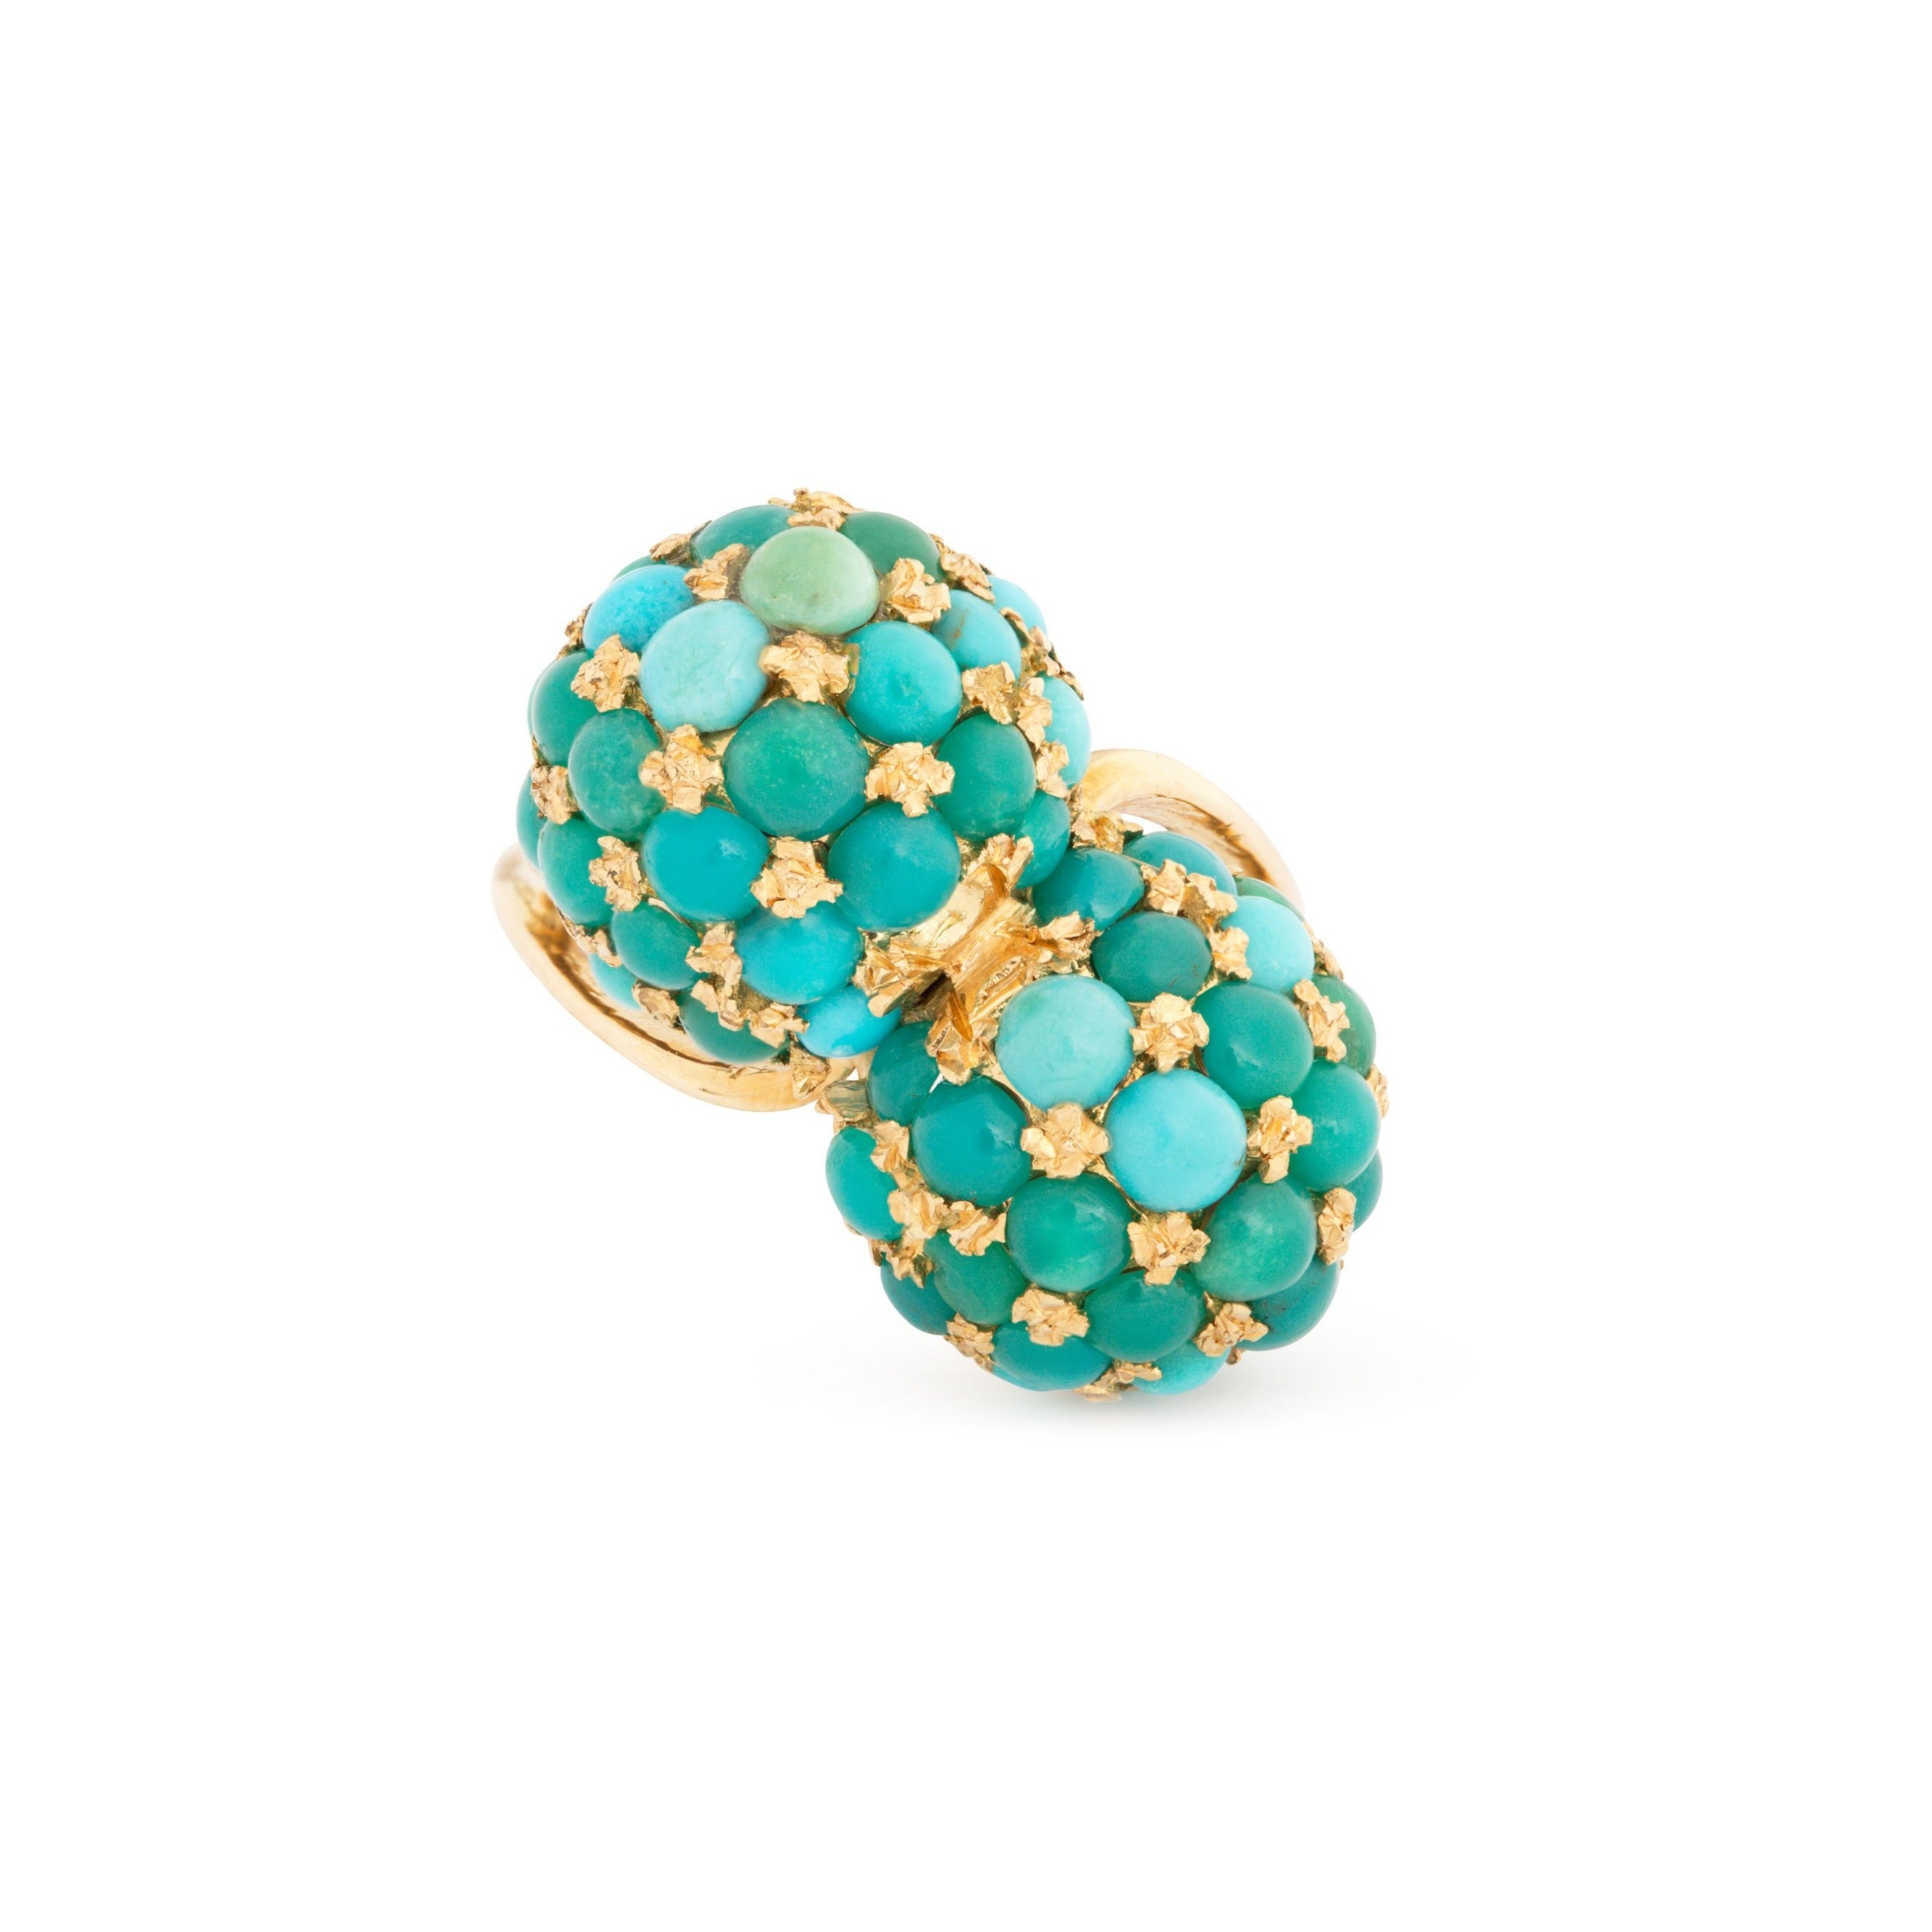 Pavé Turquoise and 18k Gold Bypass Vintage Ring